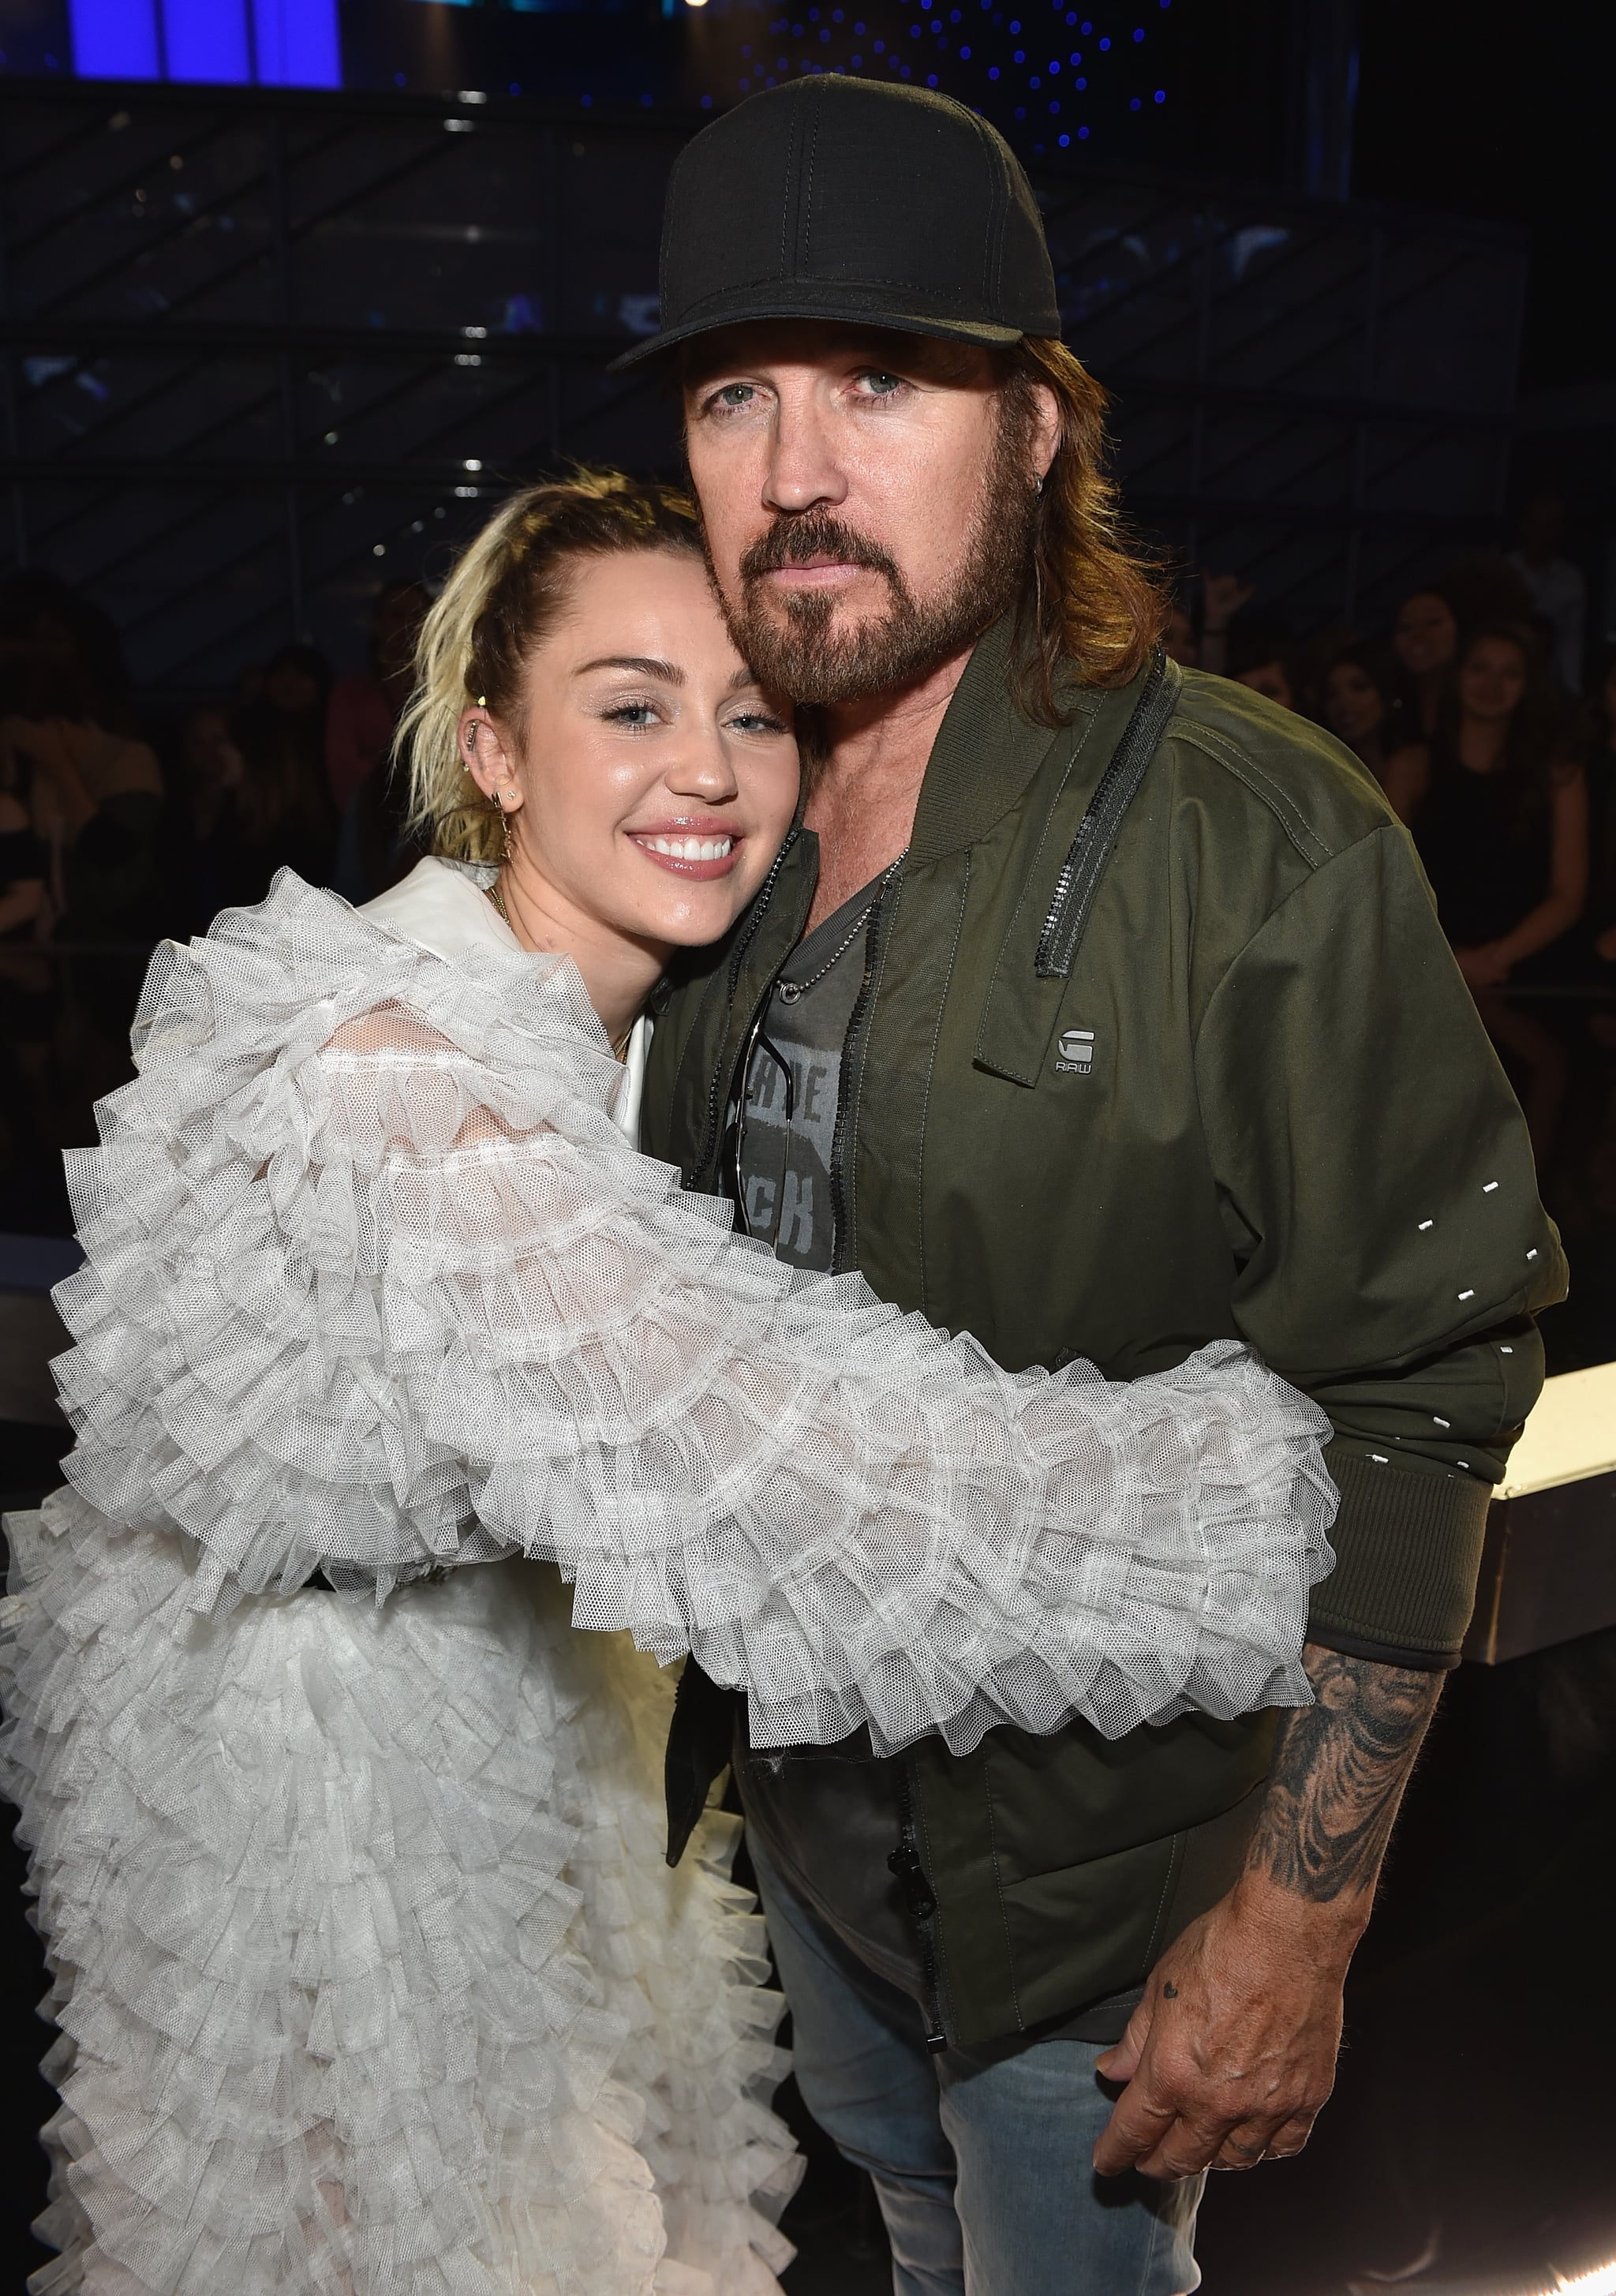 LAS VEGAS, NV - MAY 21:  Singers Miley Cyrus and Billy Ray Cyrus attend the 2017 Billboard Music Awards at T-Mobile Arena on May 21, 2017 in Las Vegas, Nevada.  (Photo by John Shearer/BBMA2017/Getty Images for dcp)